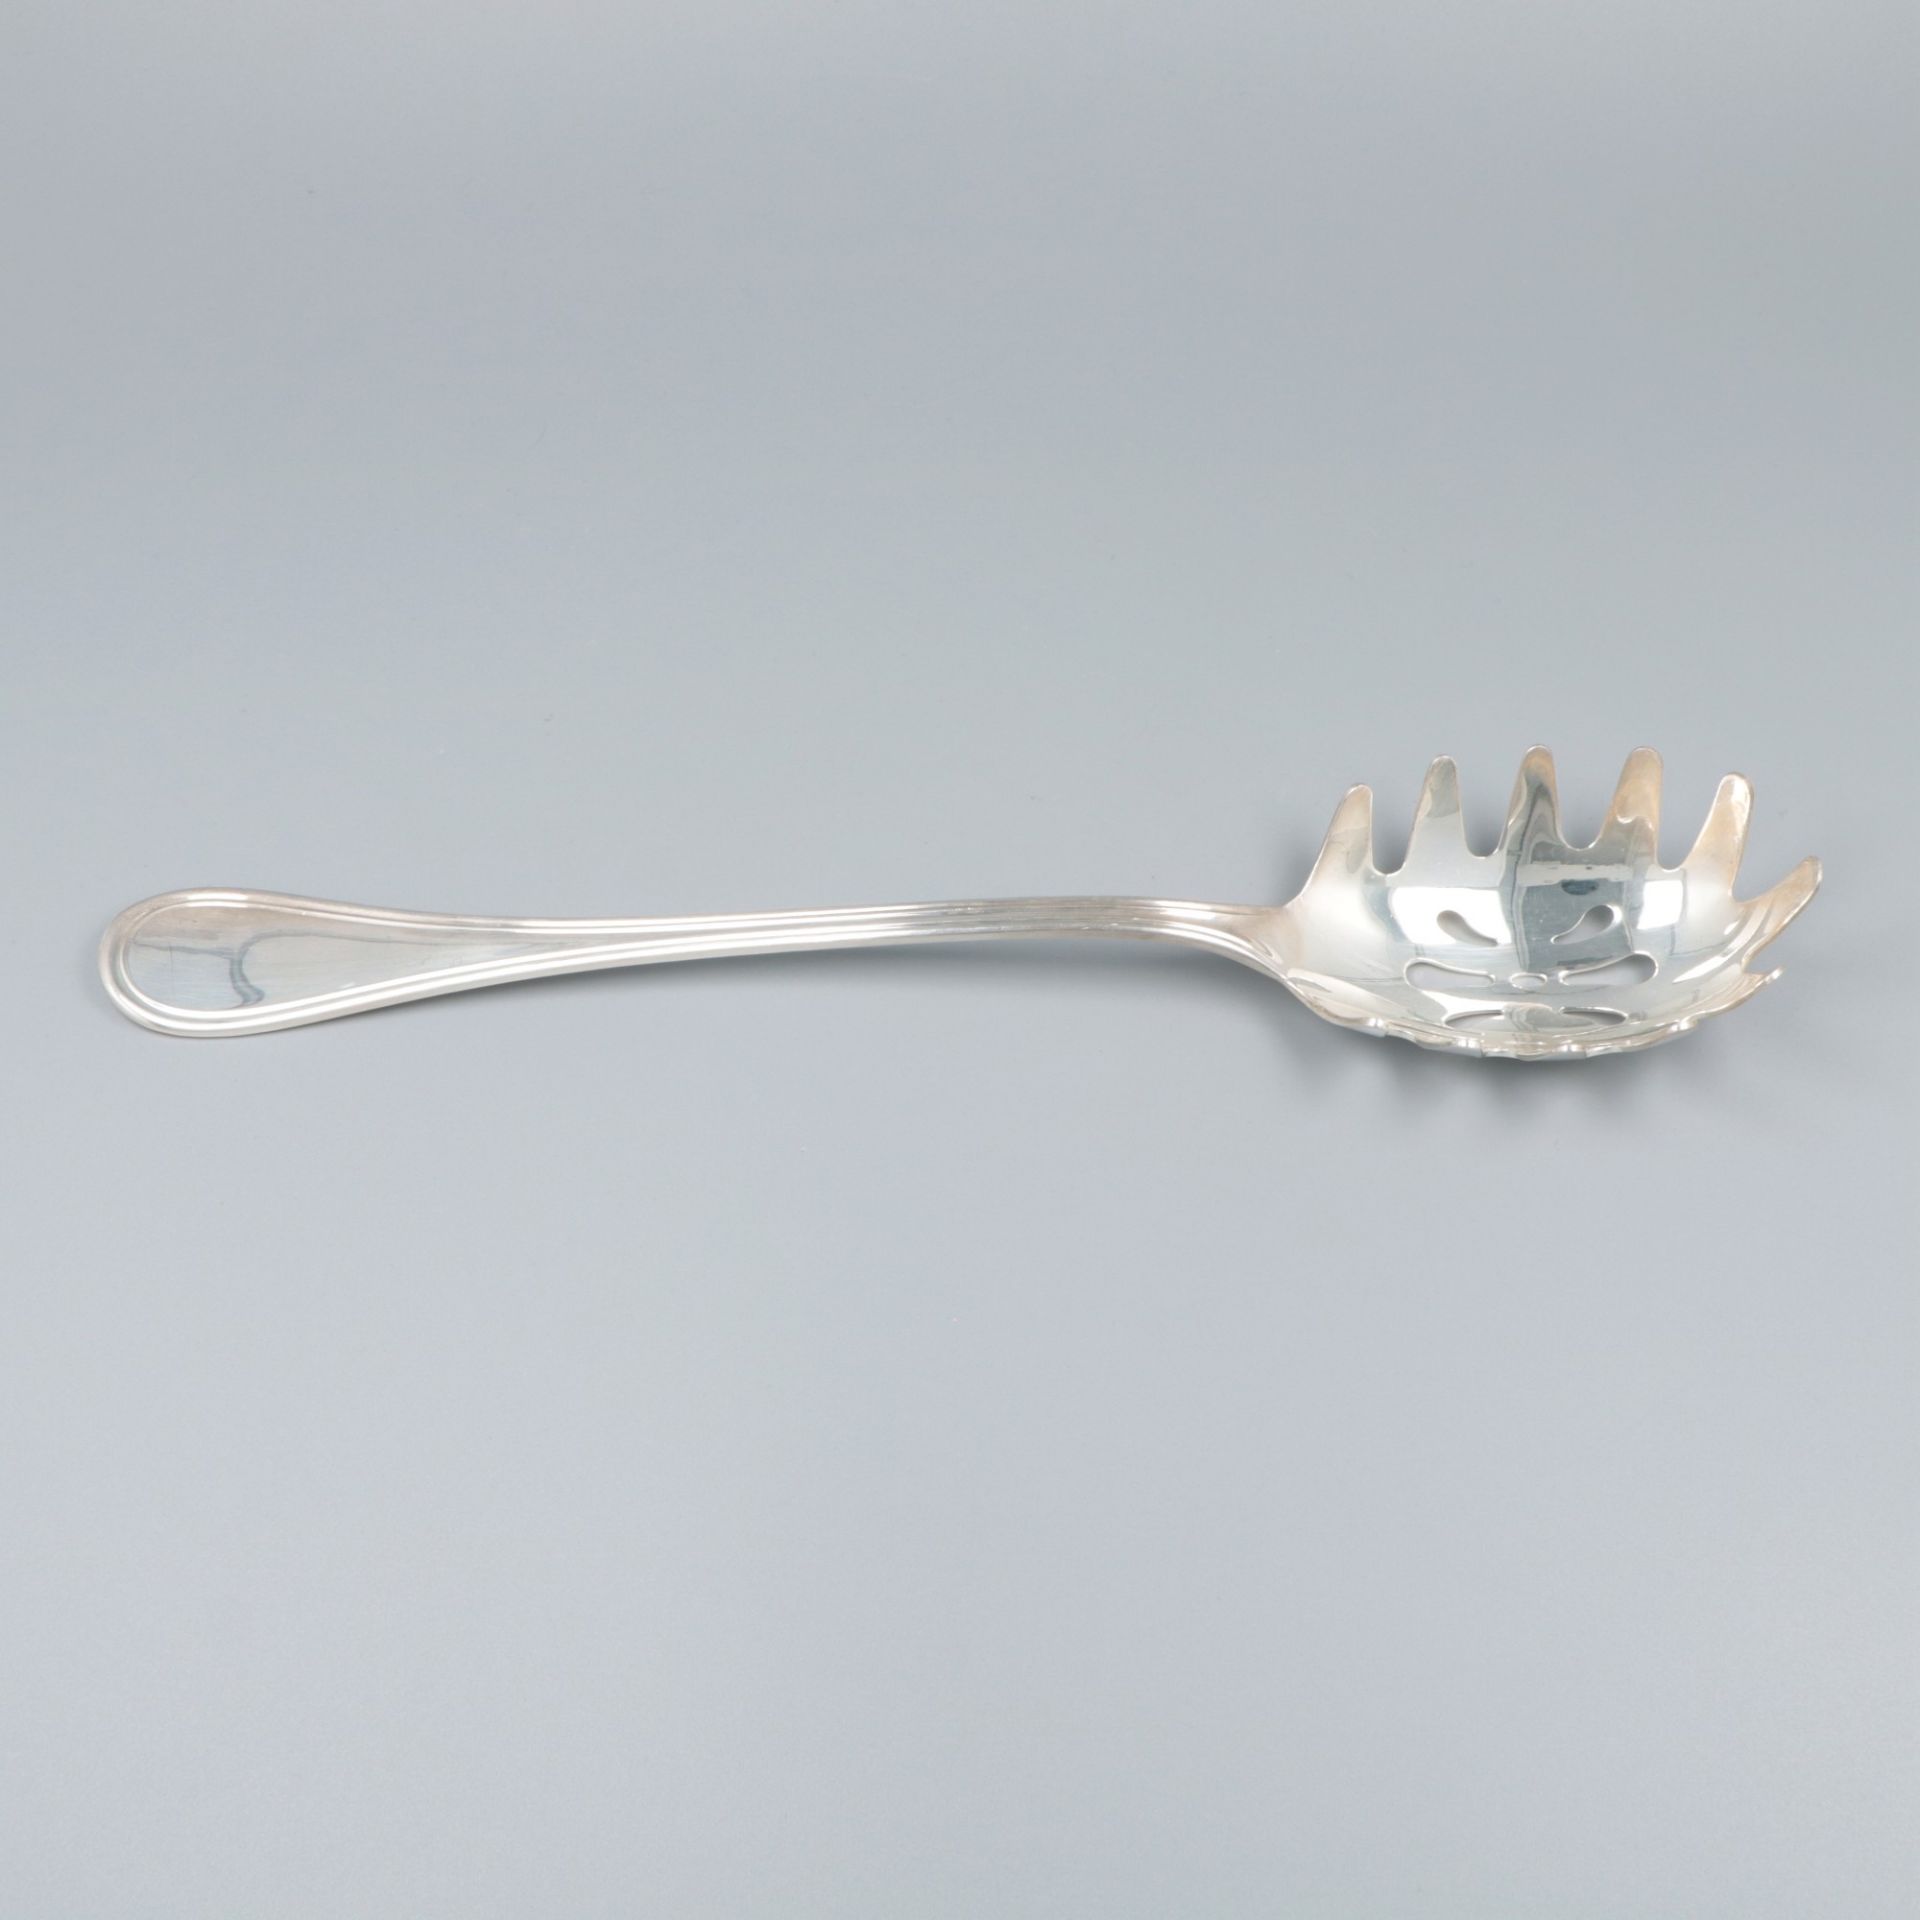 Spaghetti serving spoon silver. - Image 3 of 6